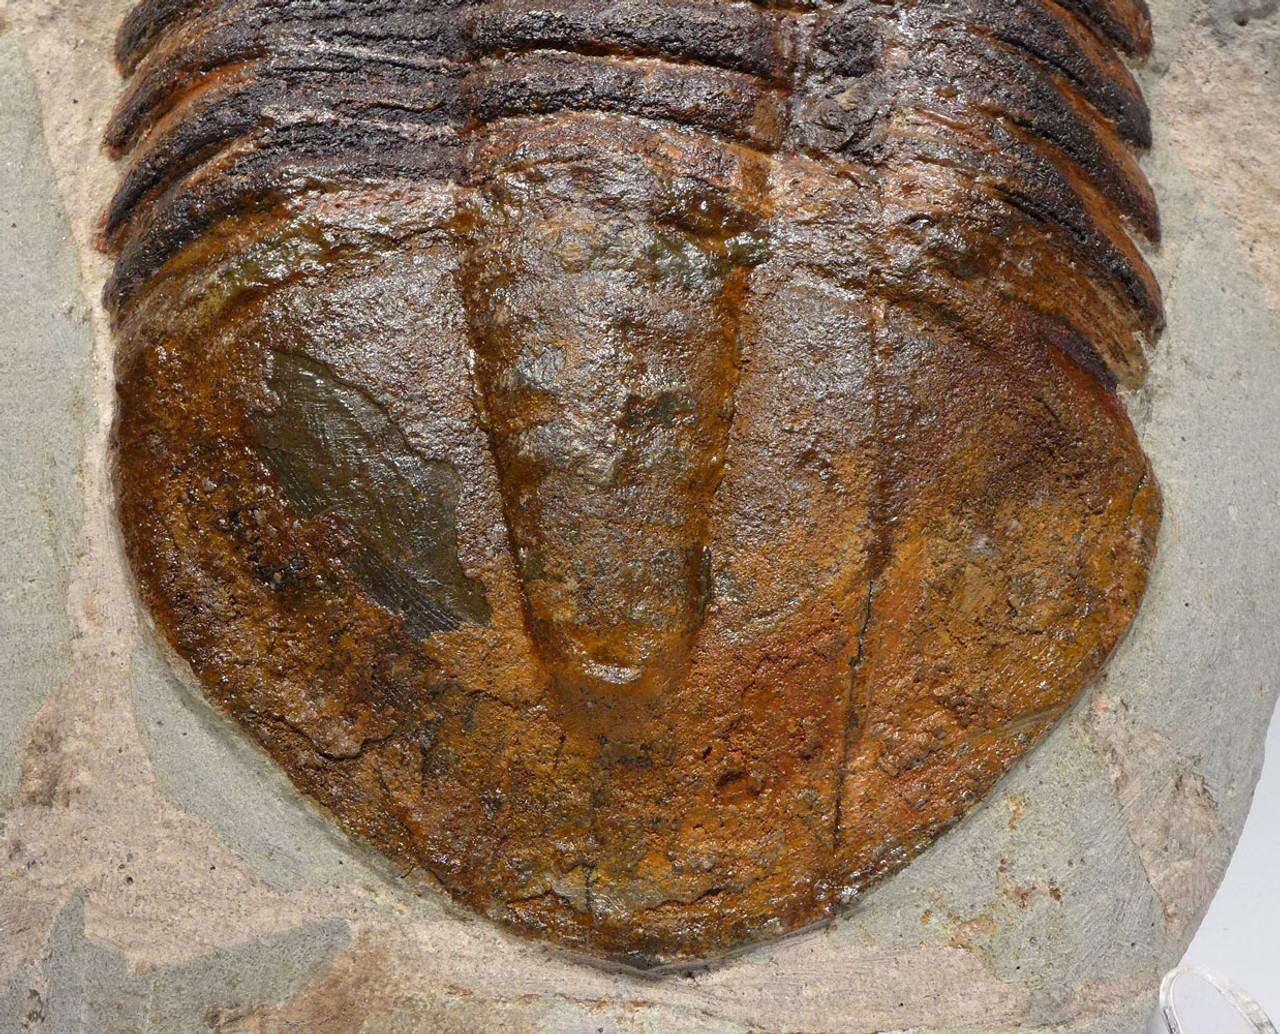 MUSEUM CLASS ORDOVICIAN ASAPHID TRILOBITE WITH STUNNING COLORS AND PRESERVATION *TRRD01